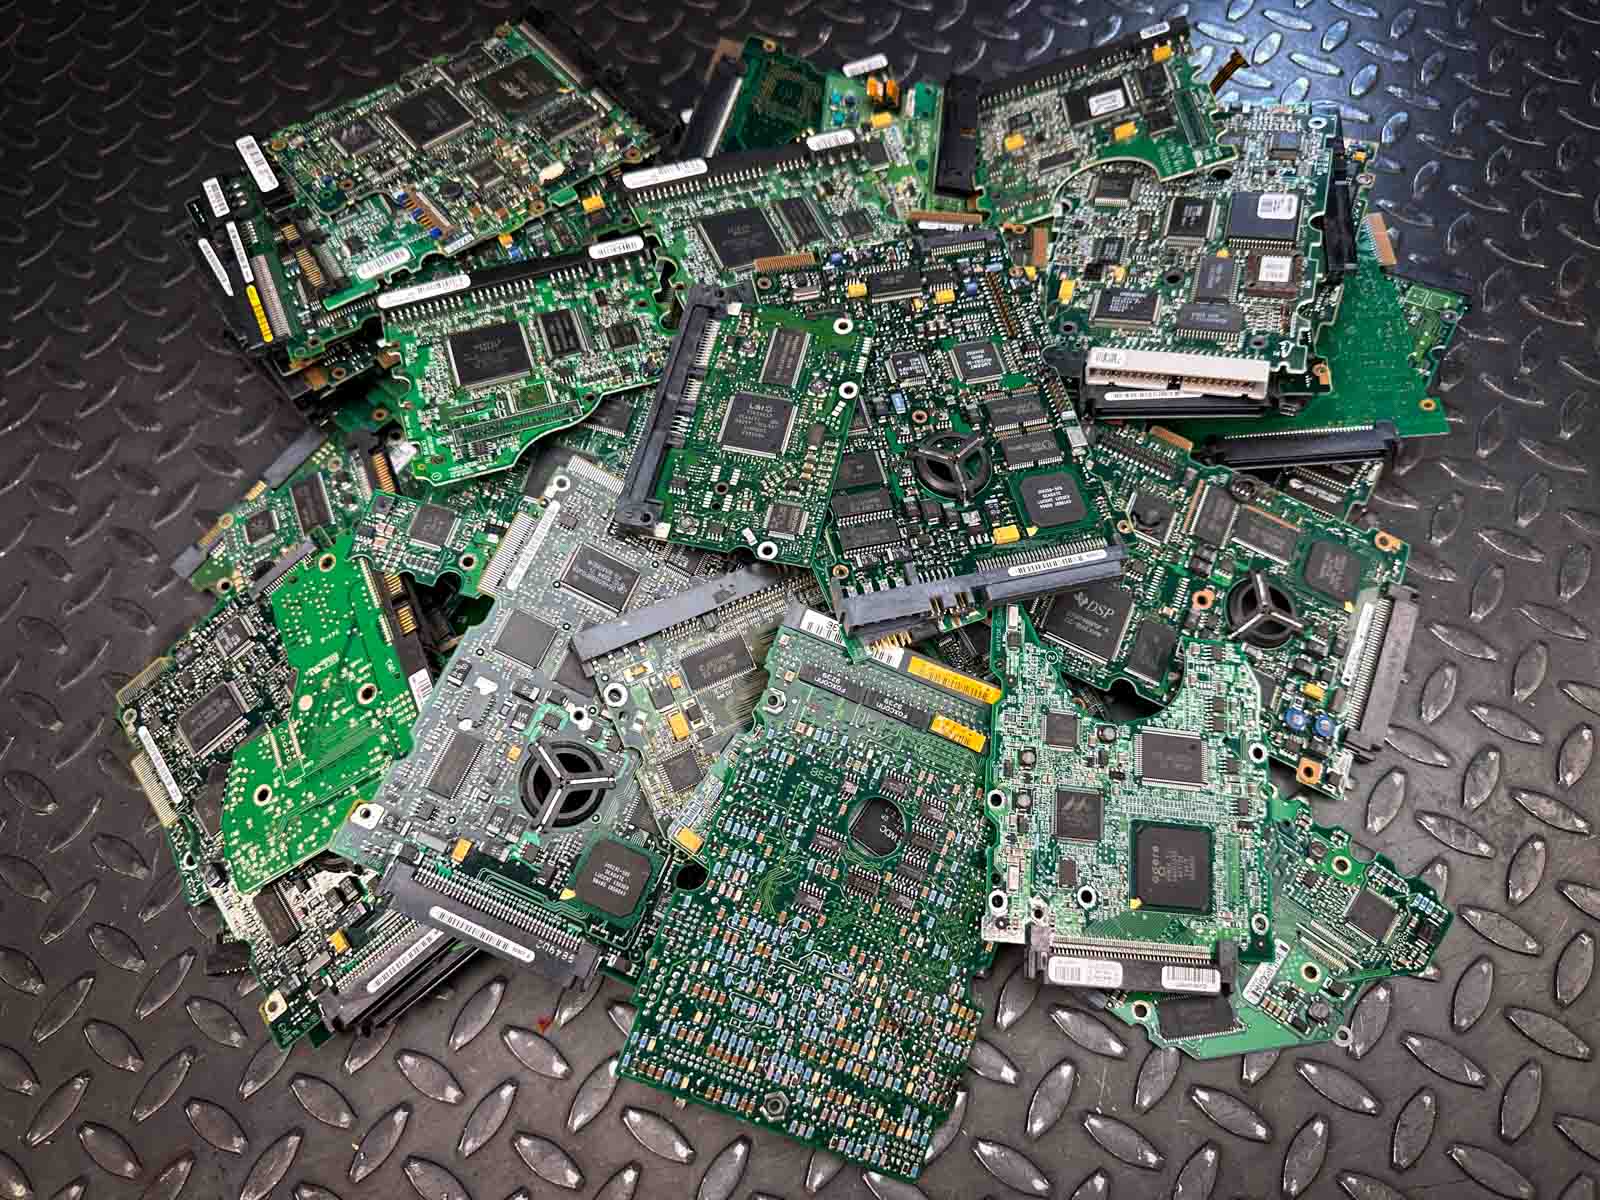 A collection of discarded PCB and hard drive boards from computers, ready for precious metal recovery.